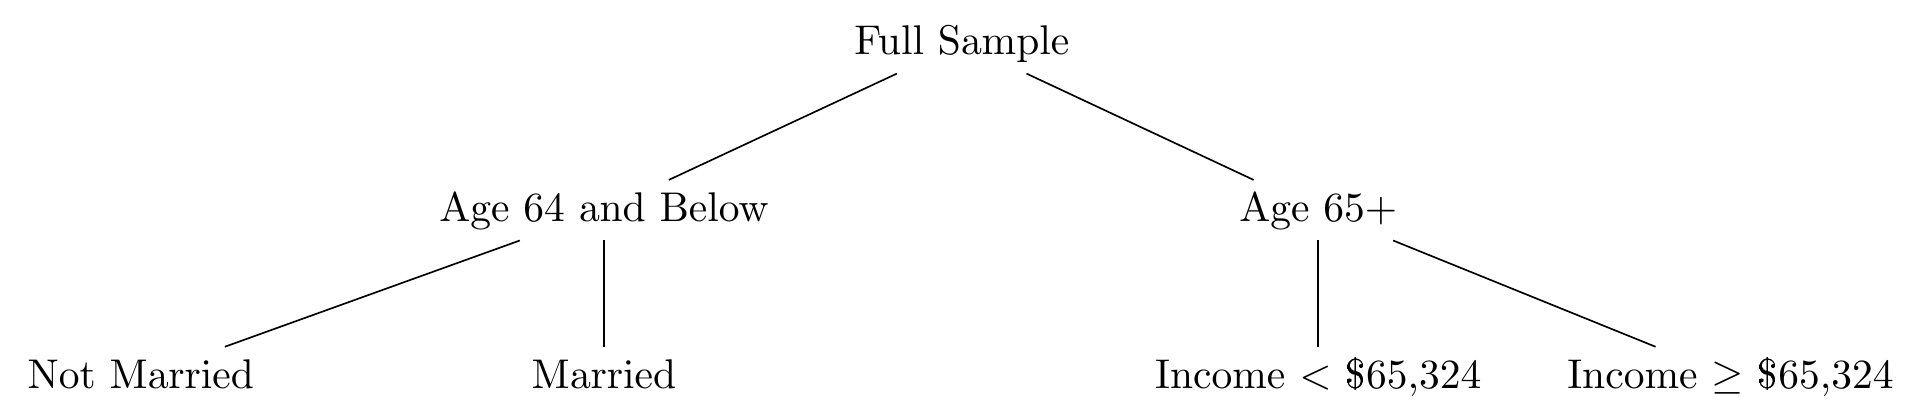 A tree showing a full sample split into two groups - age 65 and above, and age 64 and below. Then, the age 65 and above is split into income below and above $65,324, and age 64 and below is split into married and not married.